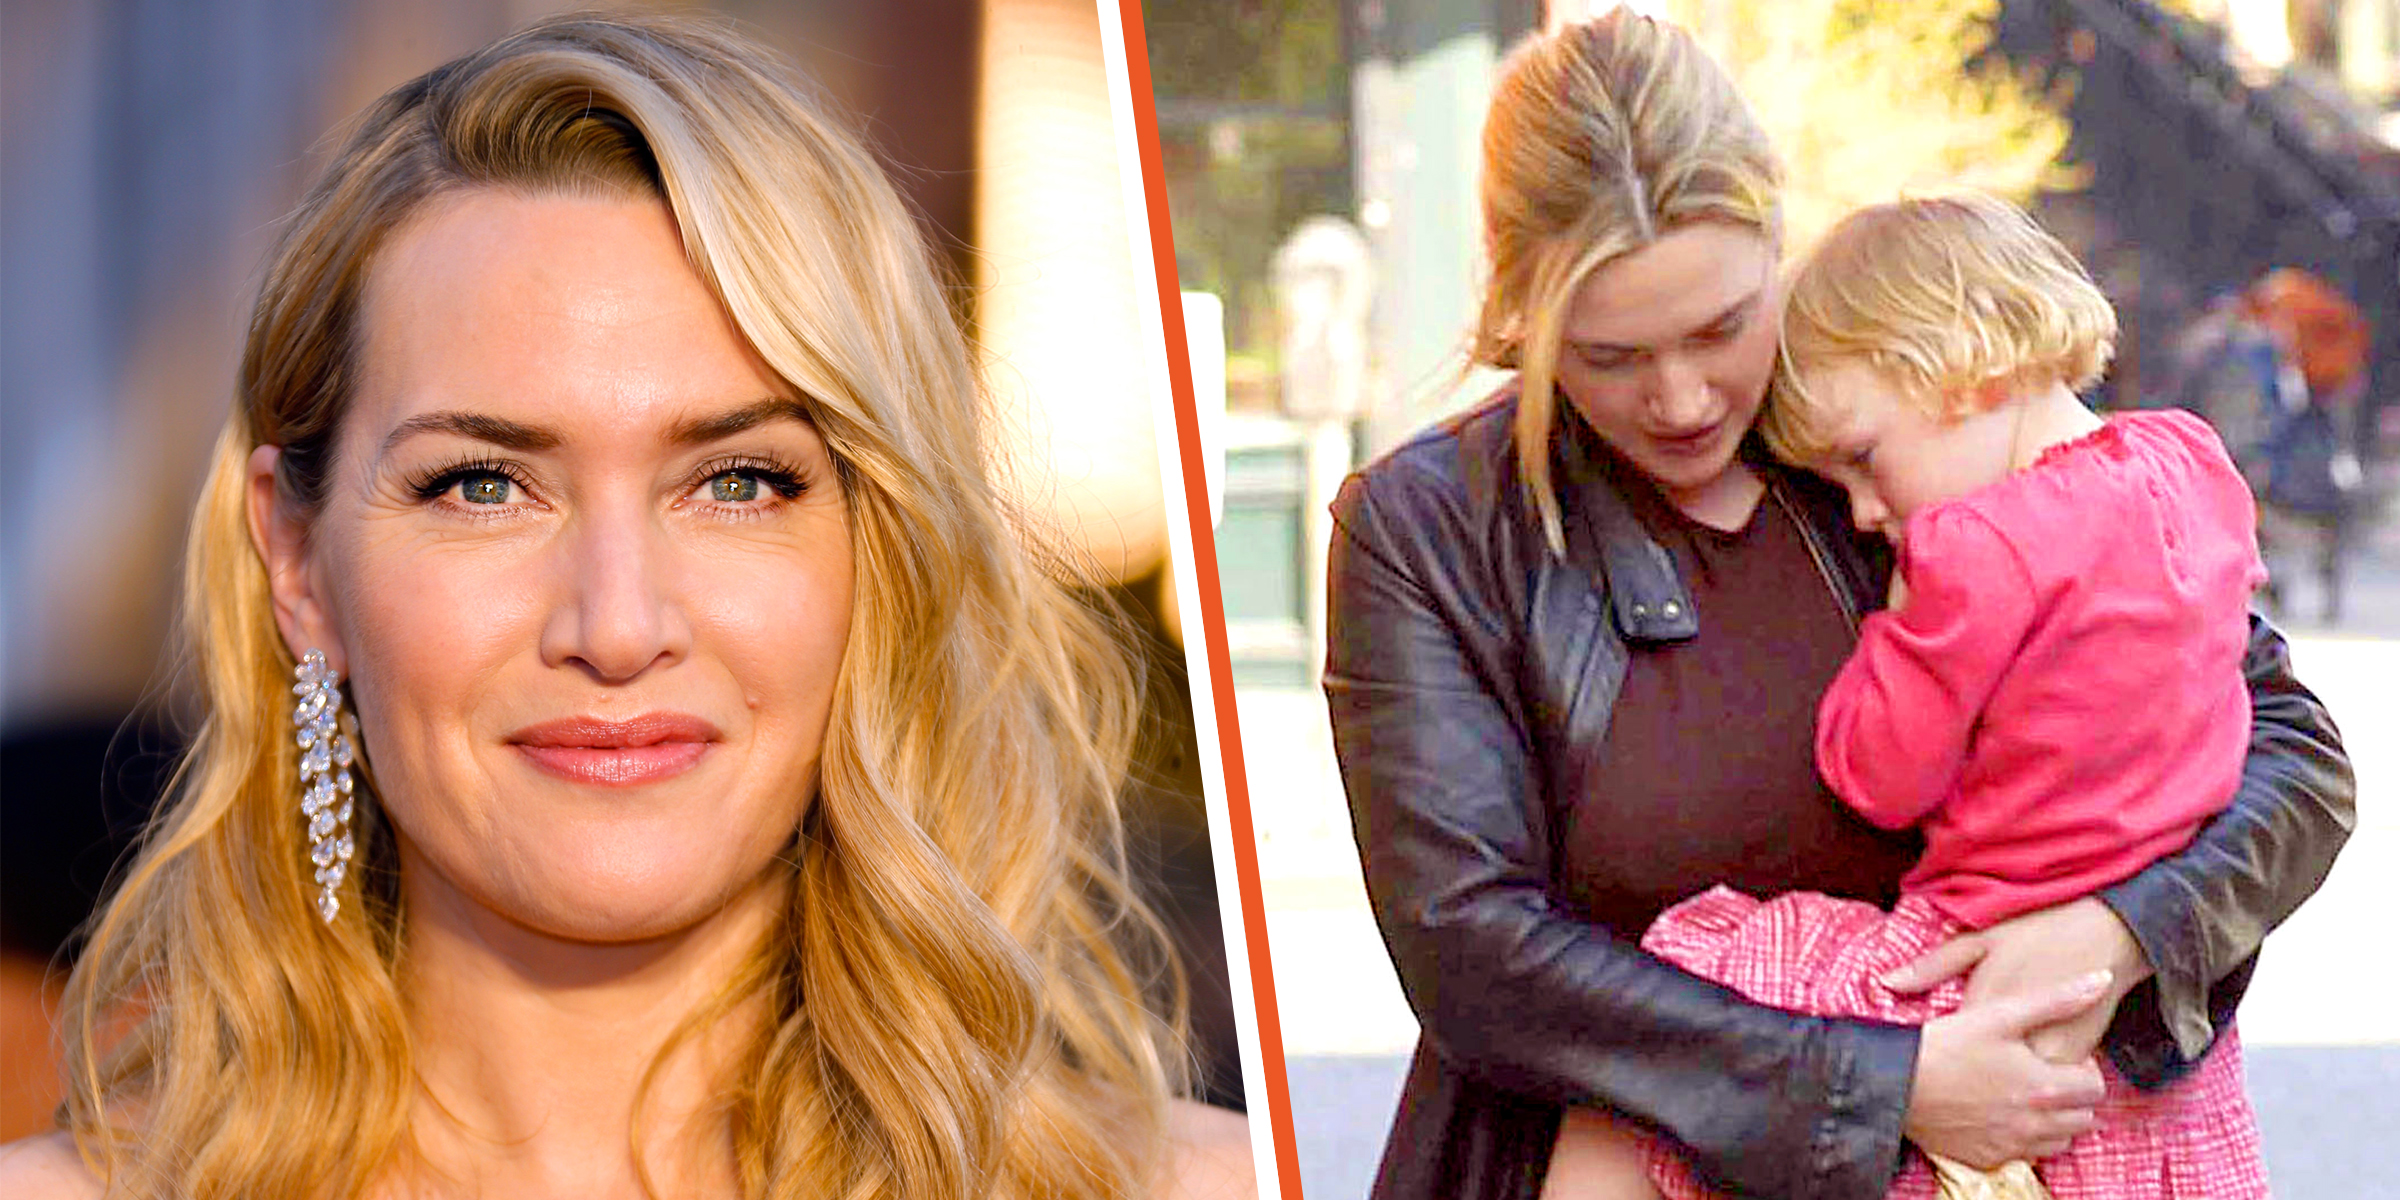 Kate Winslet | Kate Winslet and Mia Threapleton | Source: Getty Images